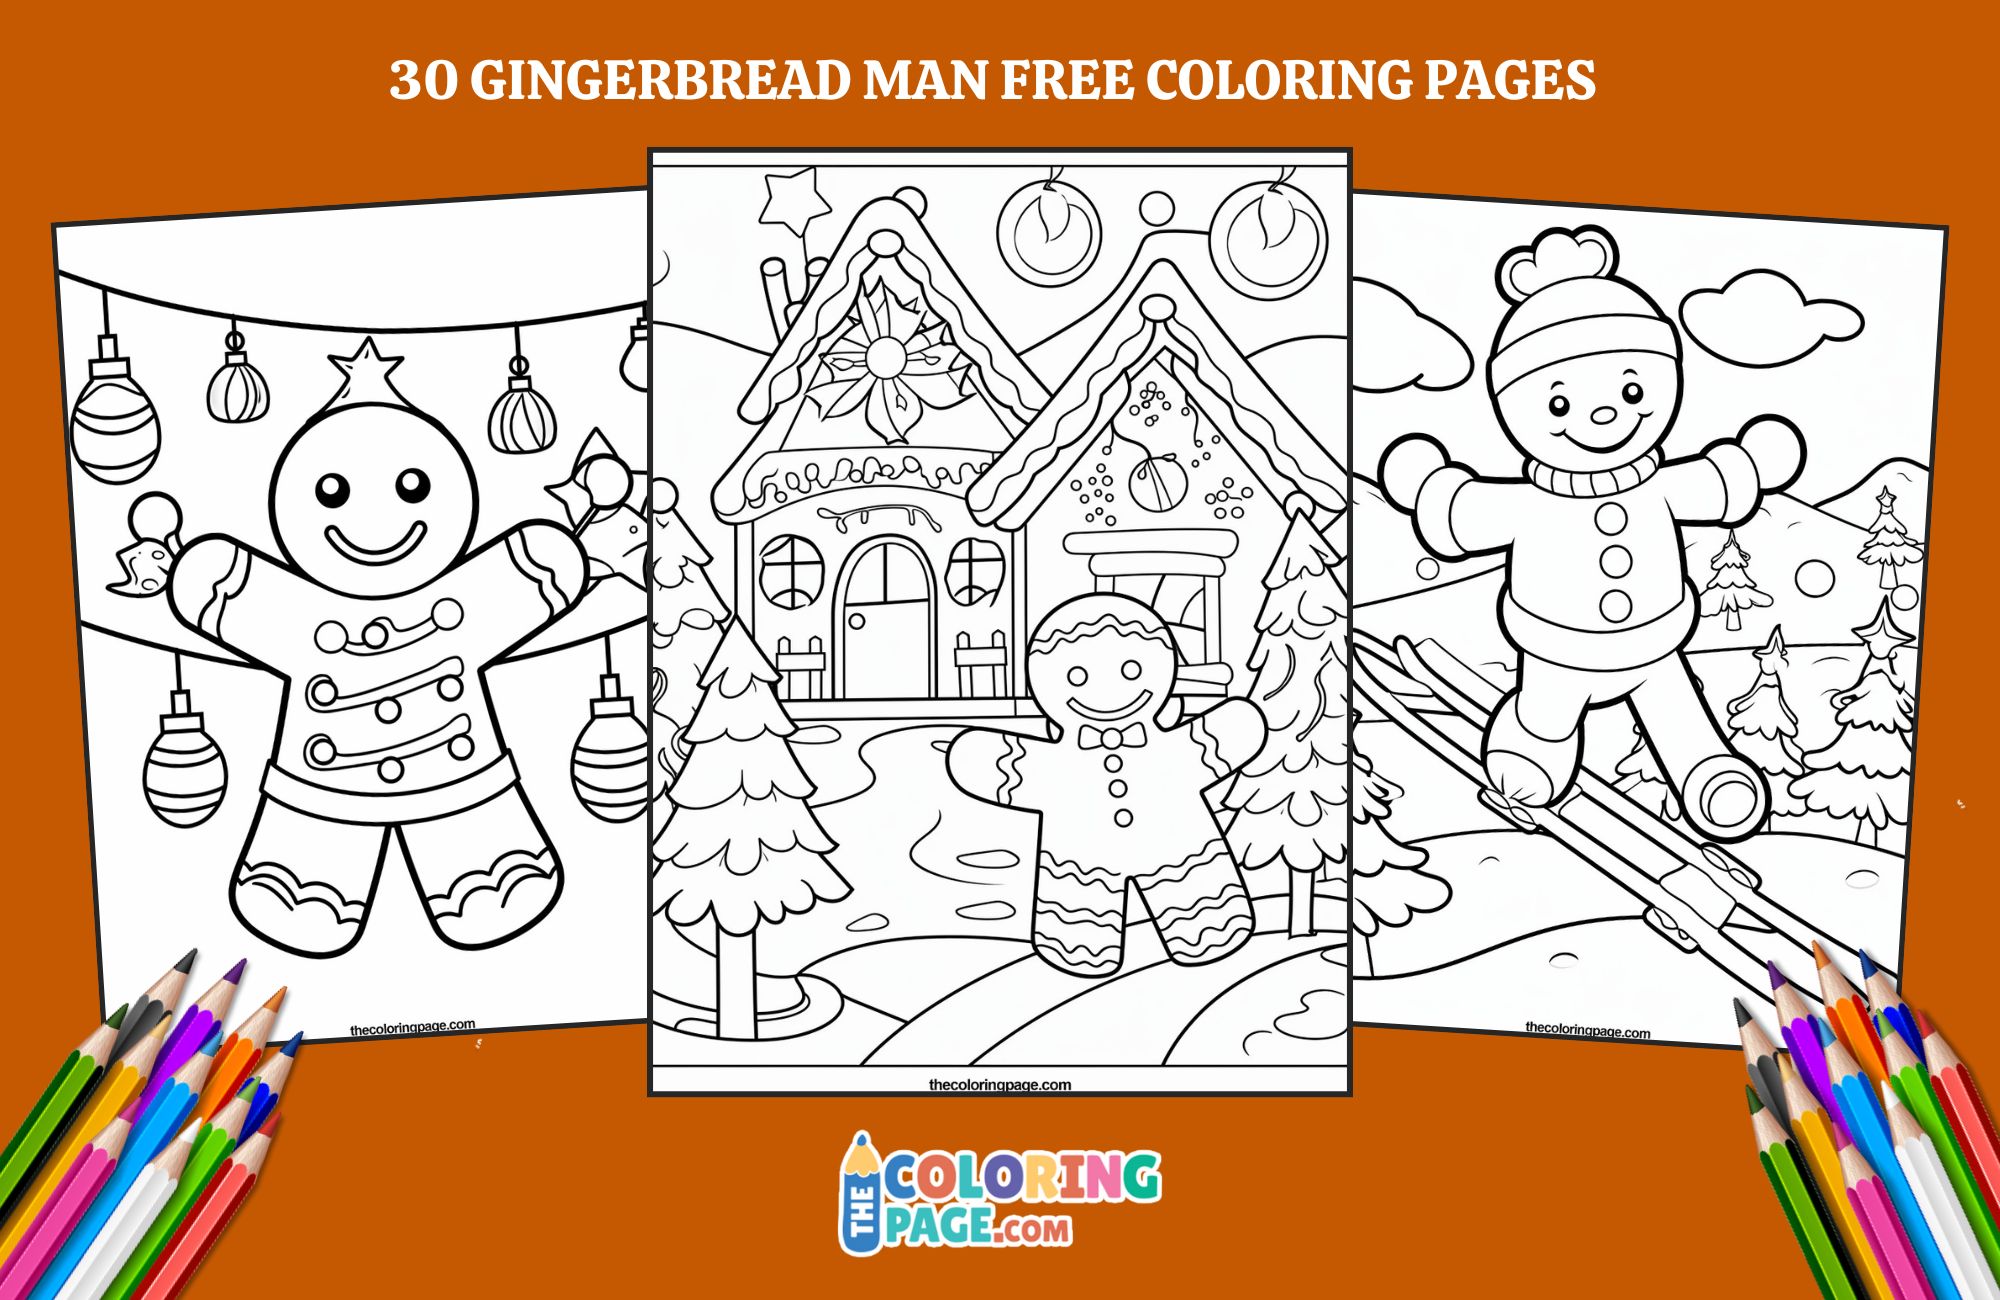 30 Free Gingerbread Man Coloring Pages for kids